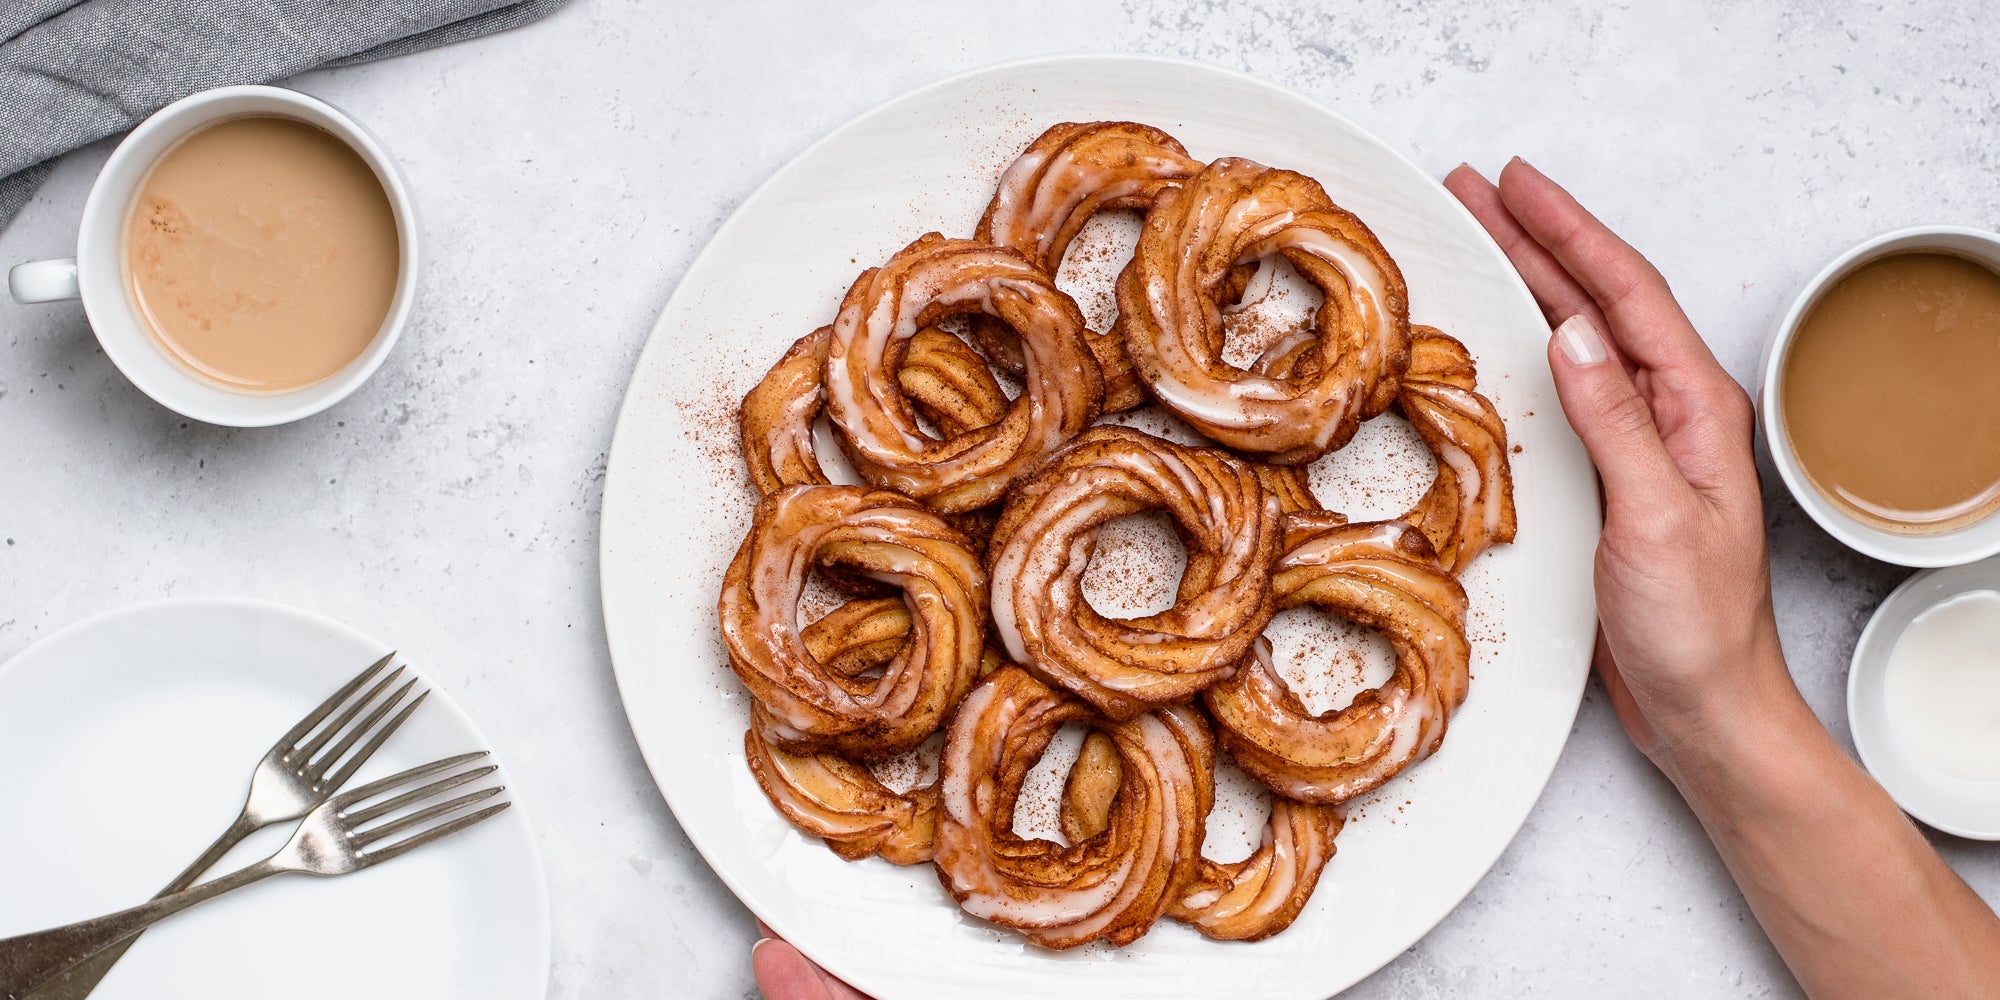 A plate of Apple Cider Crullers being held by hands. Dusted with cinnamon, next to cups of tea and cutlery